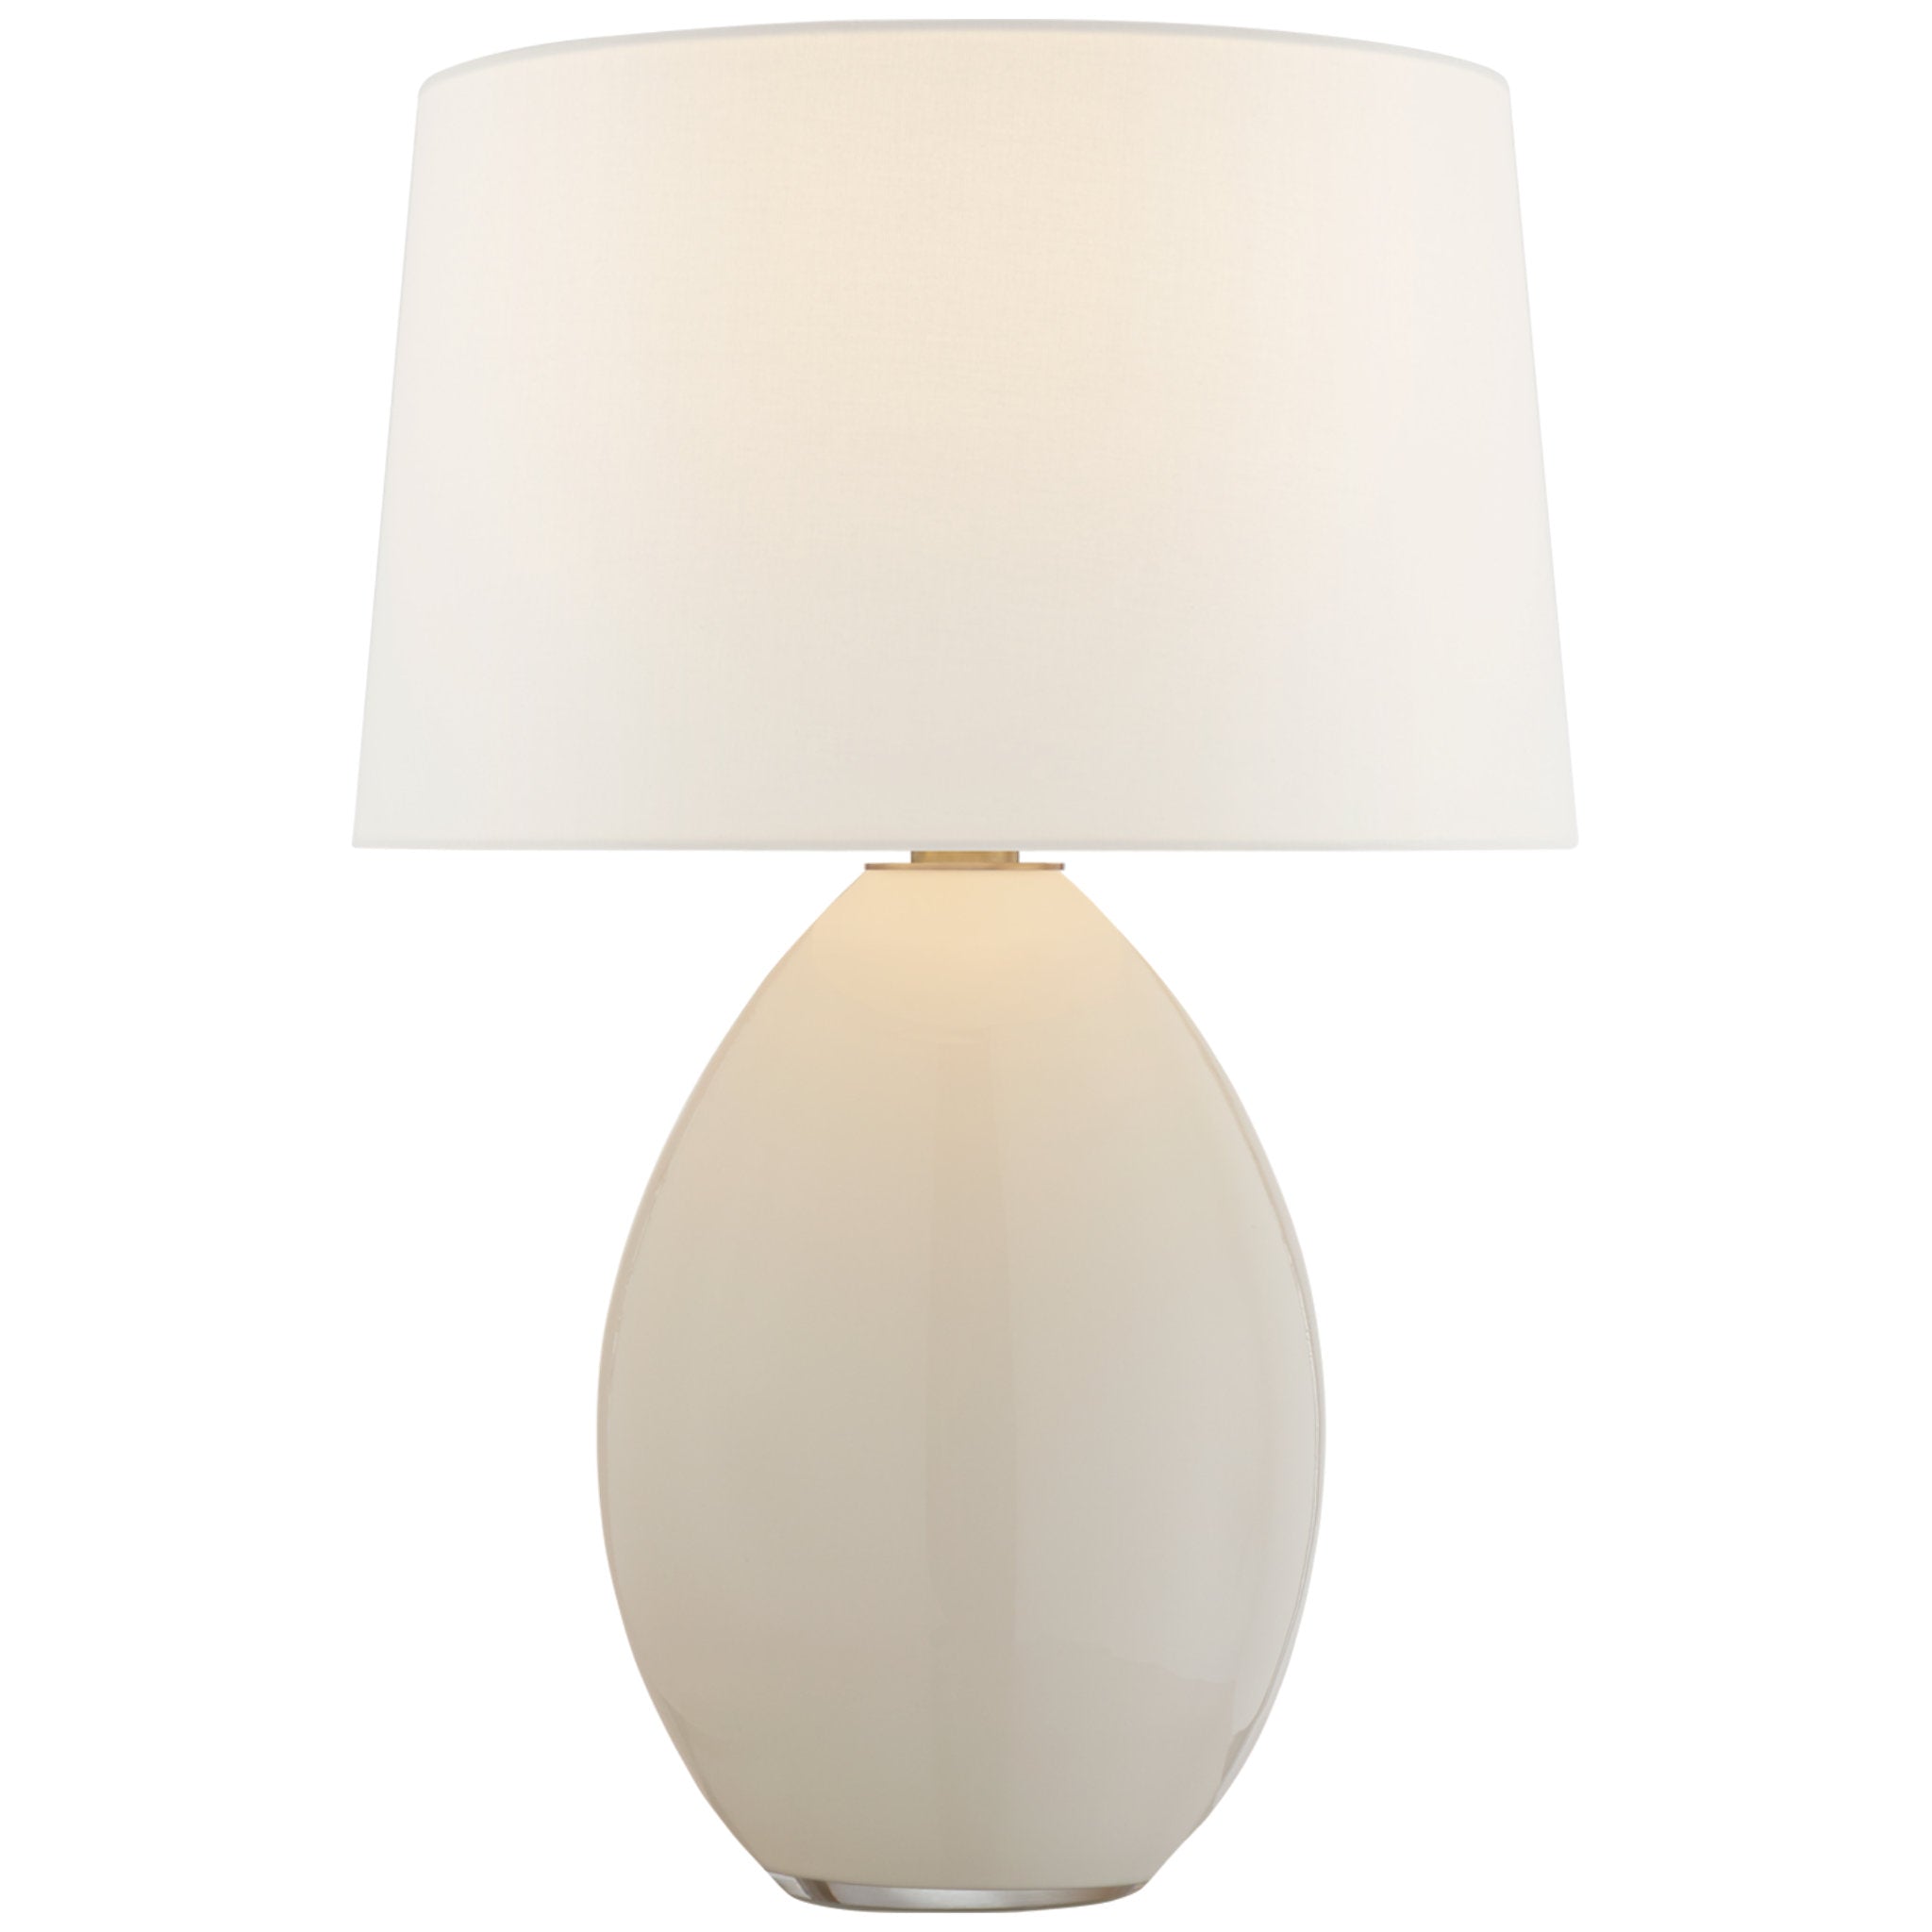 Chapman & Myers Myla Medium Wide Table Lamp in White Glass with Linen Shade